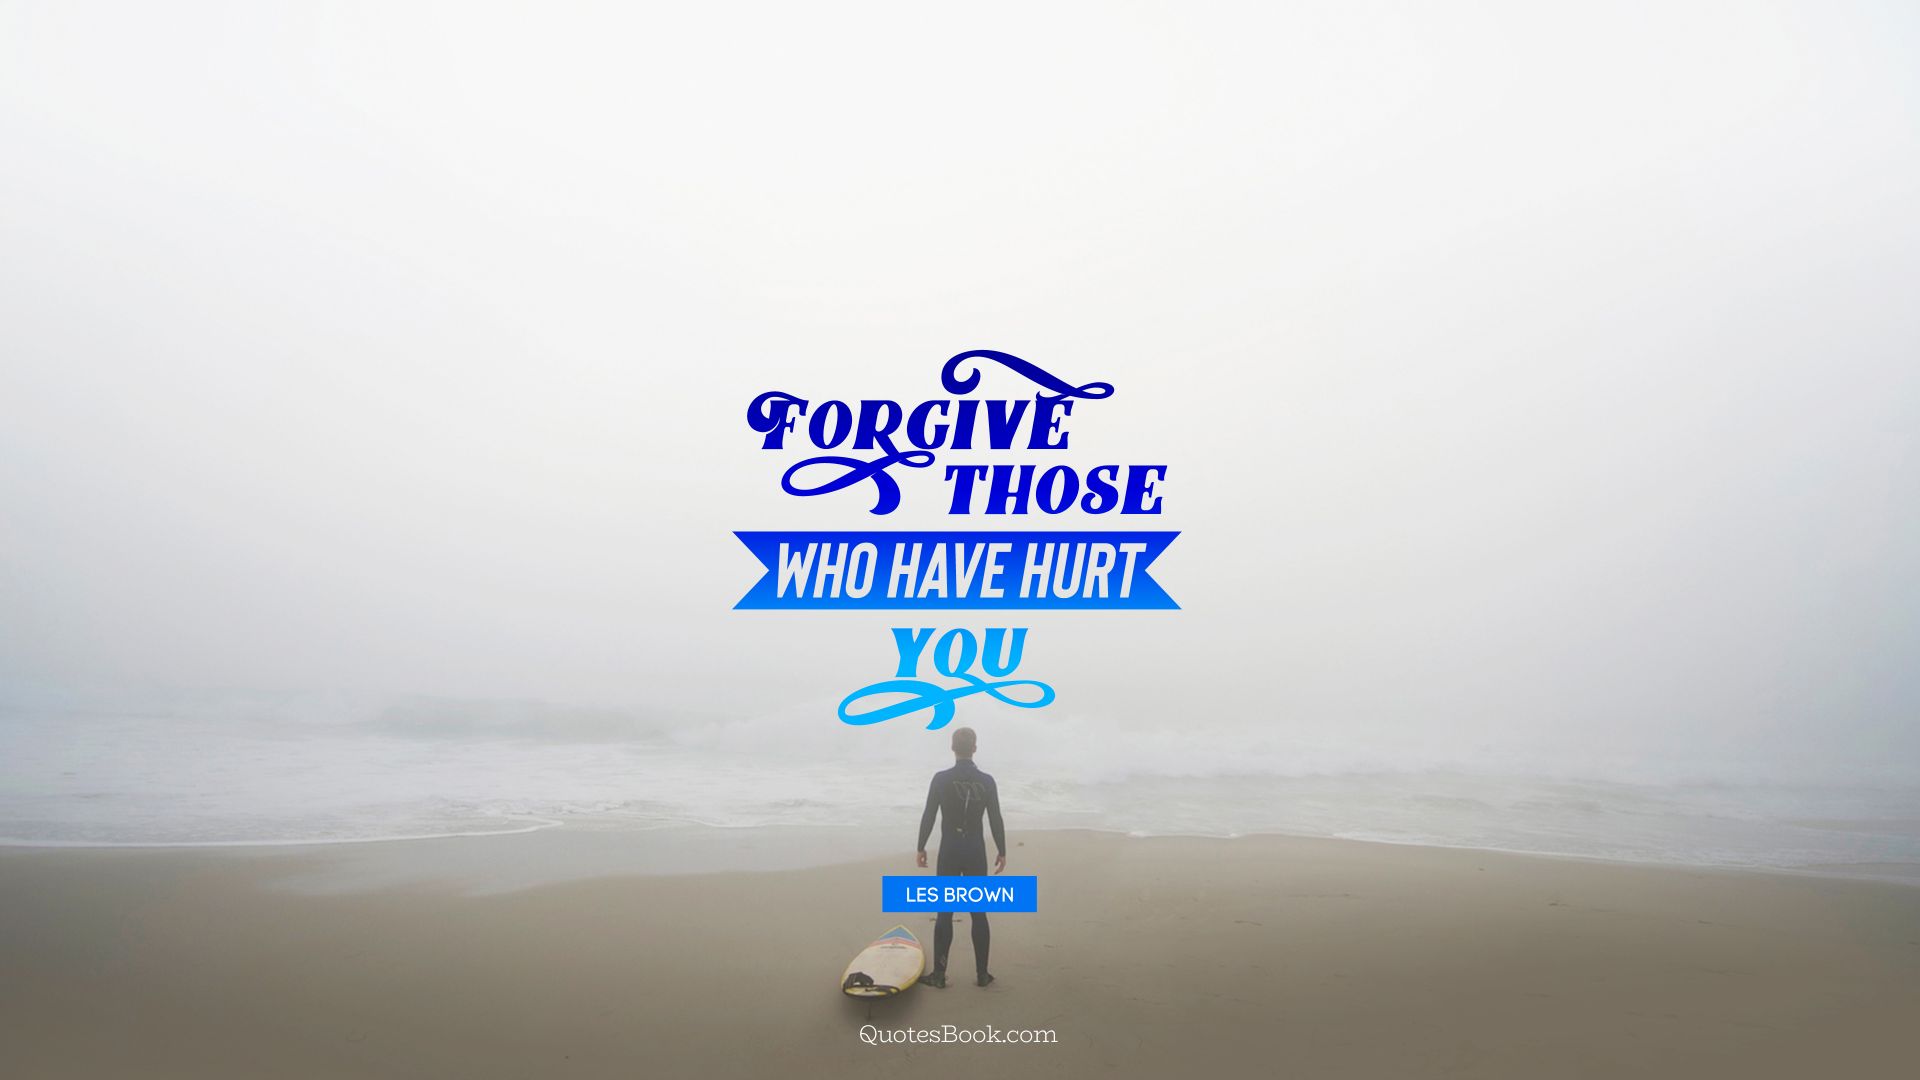 Forgive those who have hurt you. - Quote by Les Brown